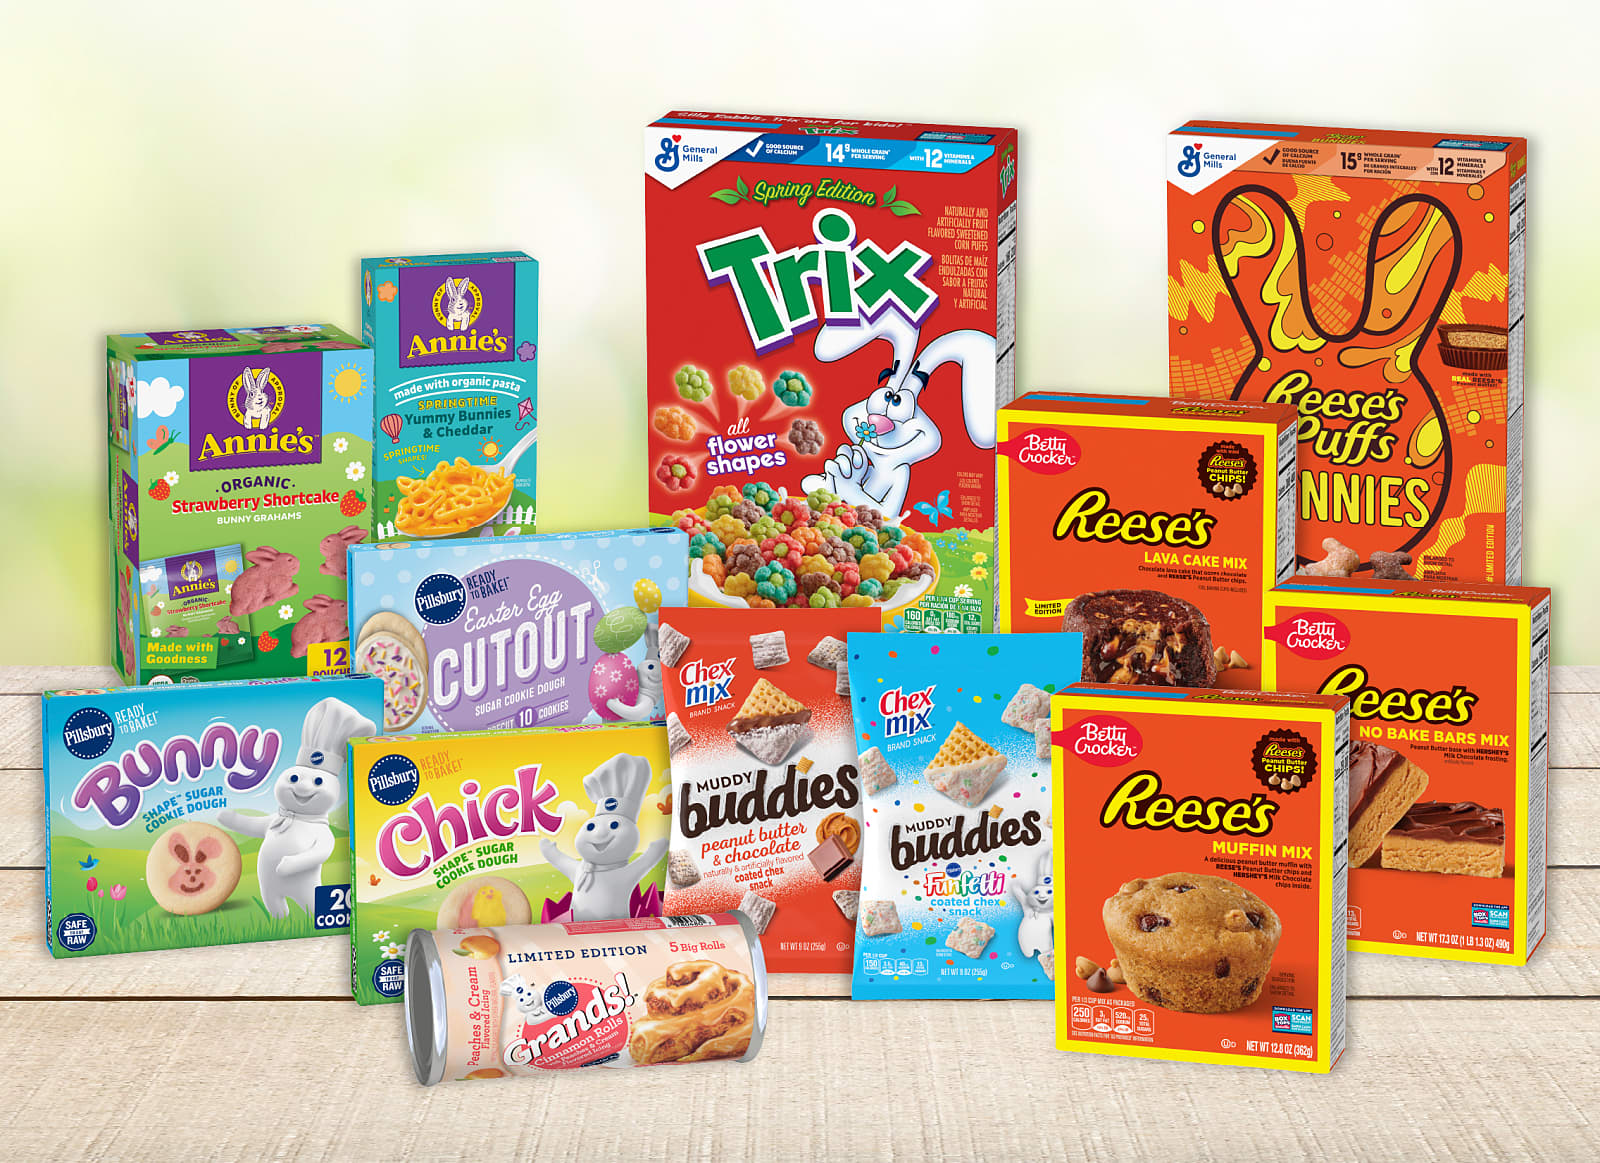 General Mills spring-themed snacks featuring Pillsbury, Betty Crocker, Annie's and more!